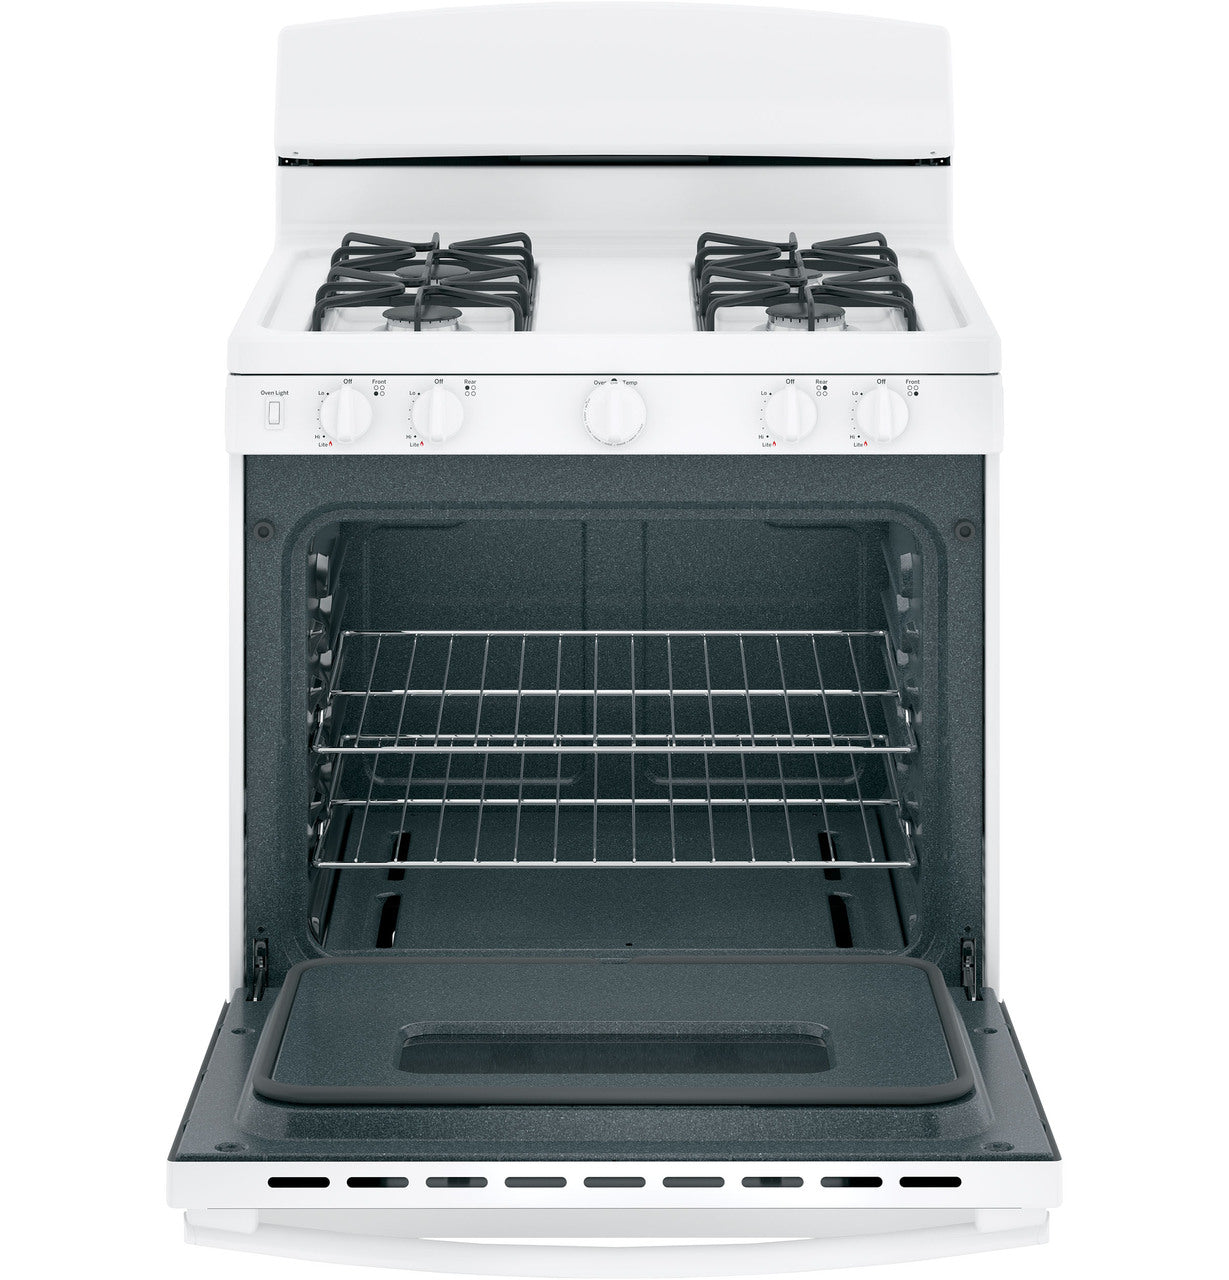 GE APPLIANCES JGBS10DEMWW - GE R 30" Free-Standing Front Control Gas Range